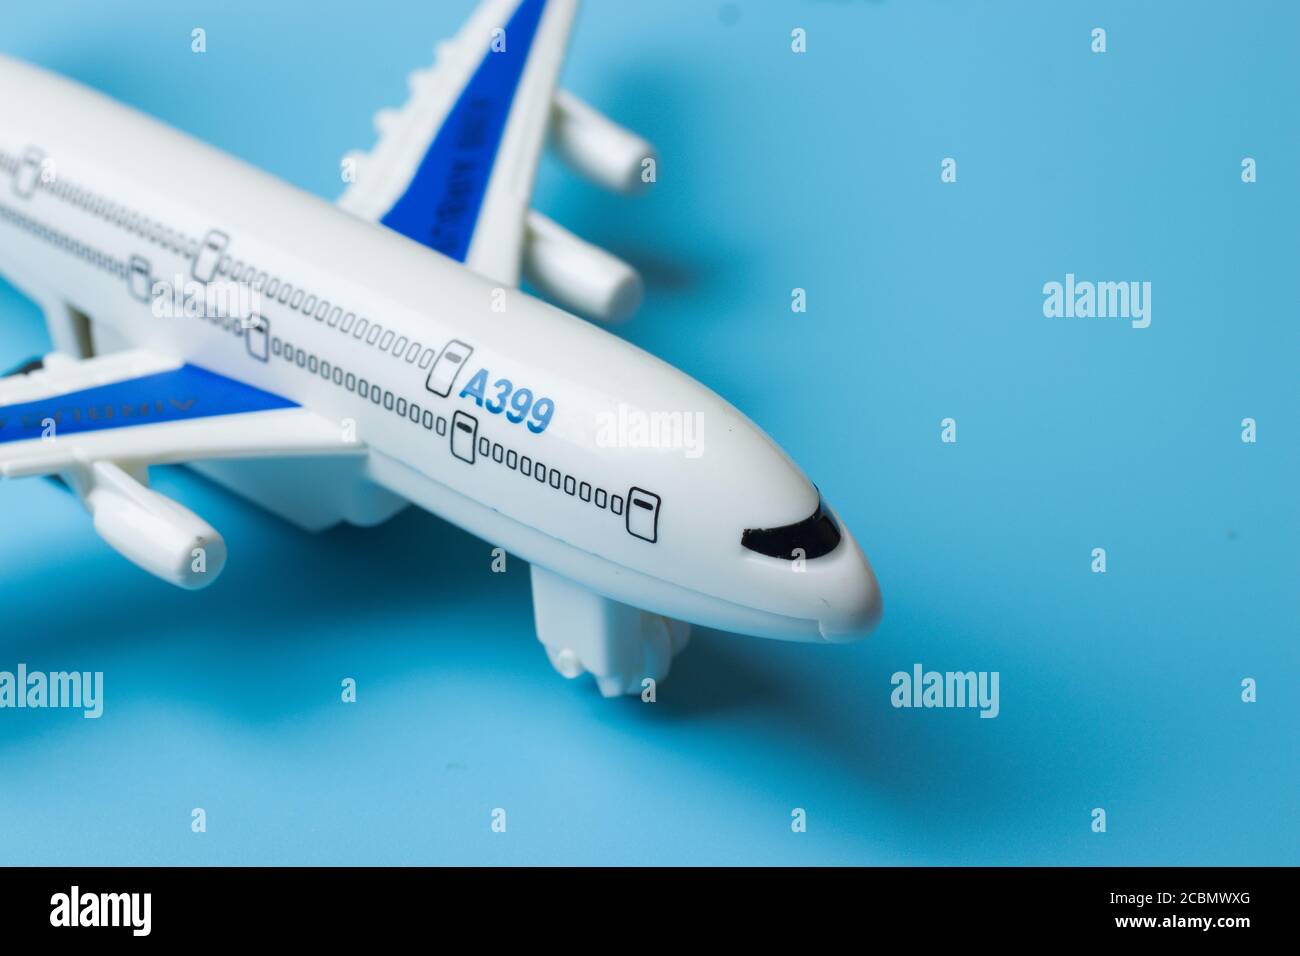 Civil Air Plane aircraft on blue background with copy space. Tourism business concept design Stock Photo